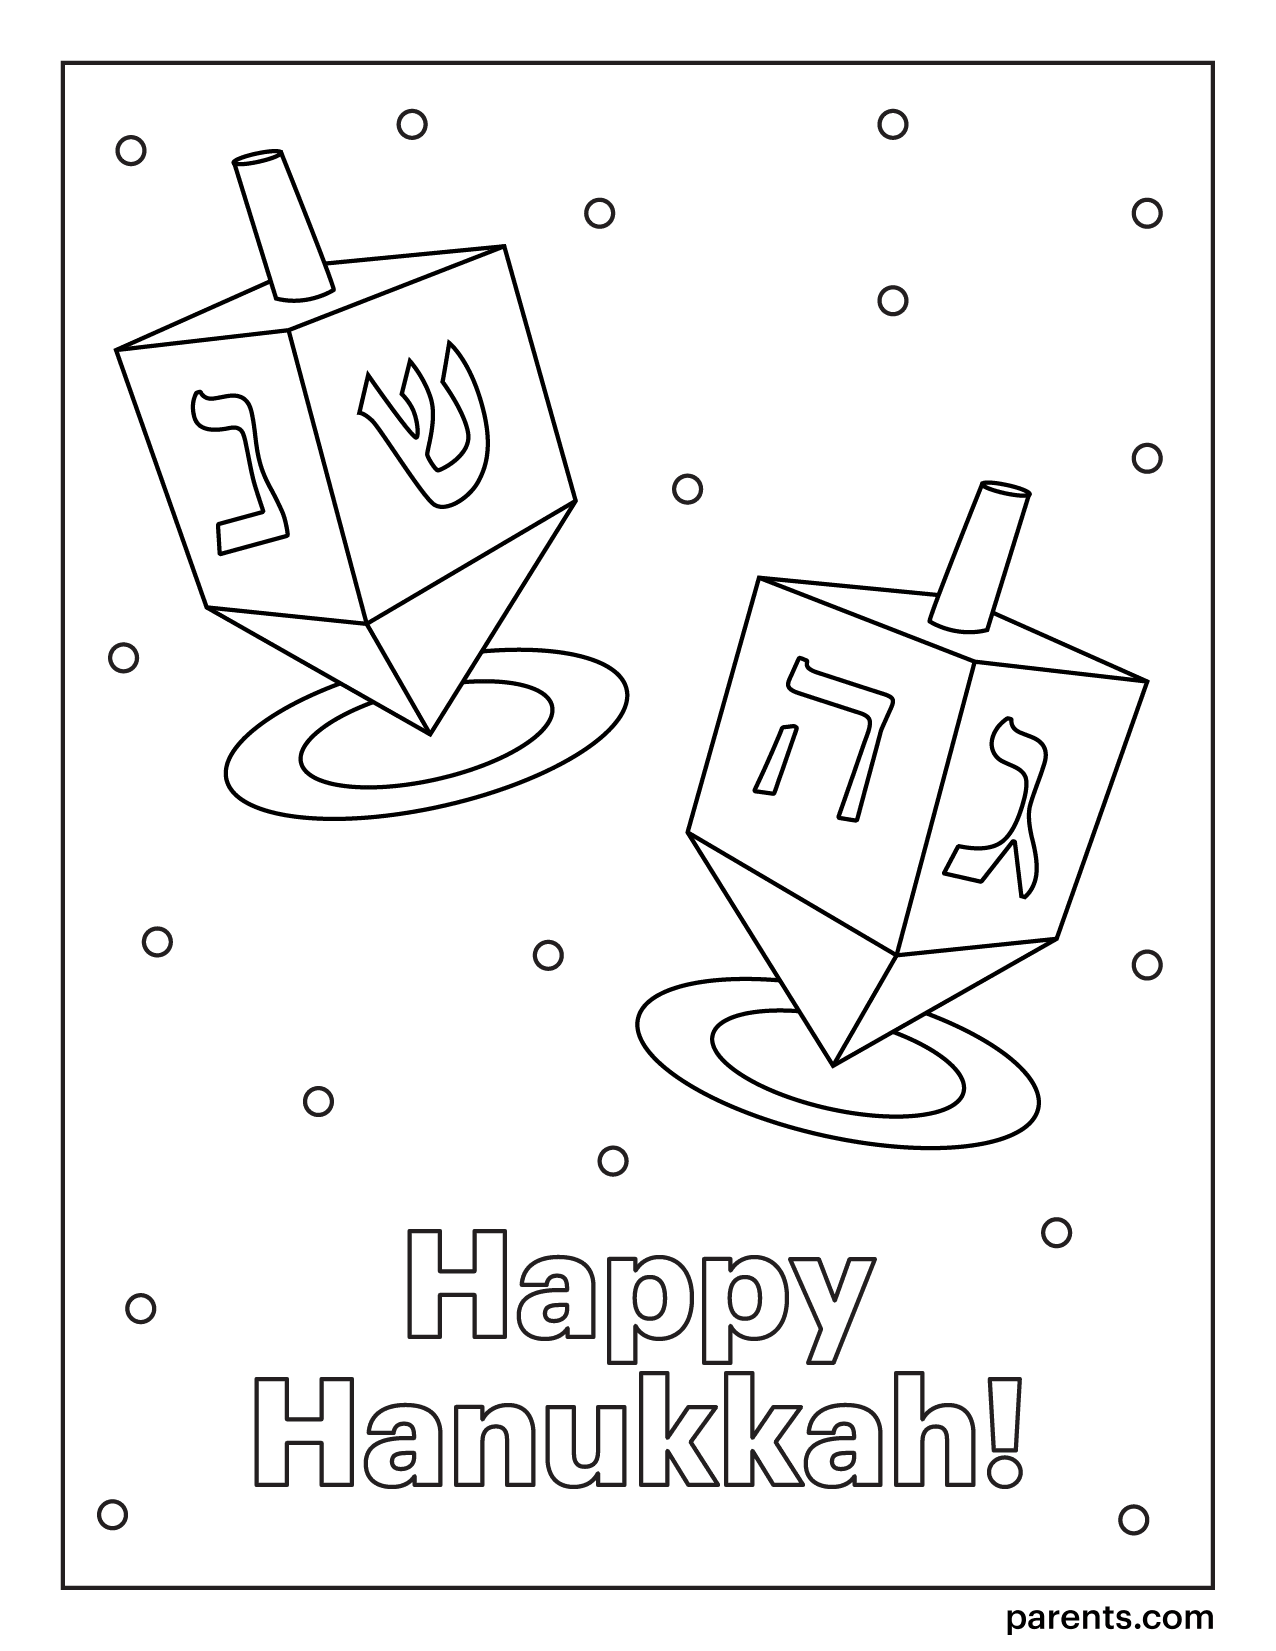 Spinning Dreidels Coloring Page